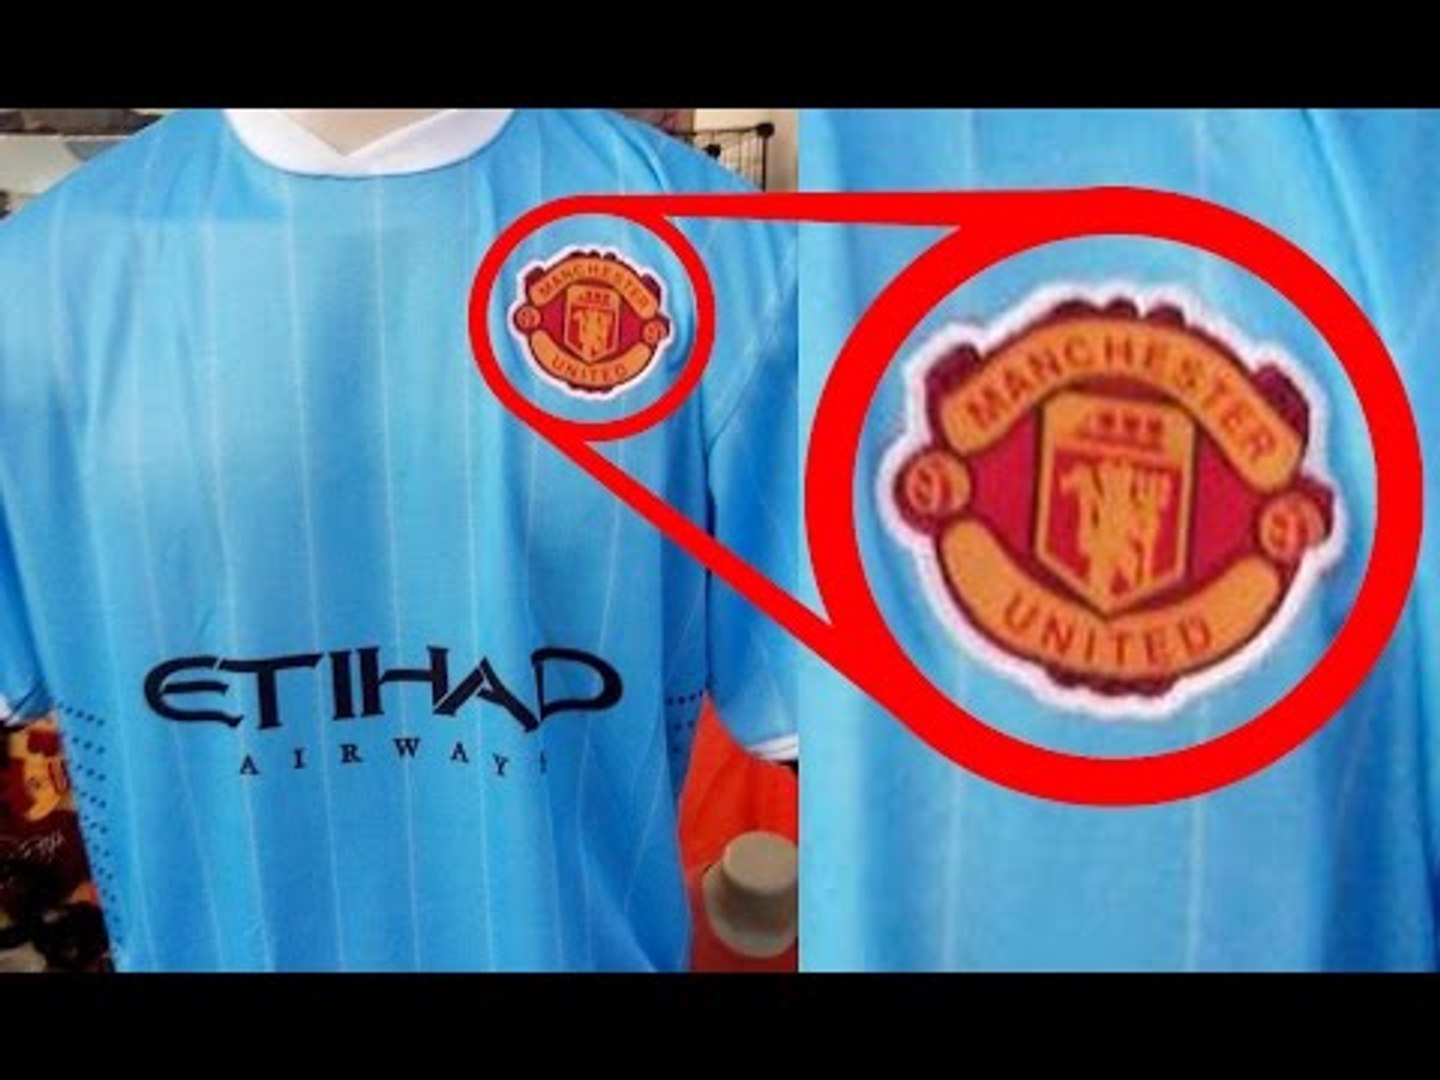 Top 10 Funniest Rip-Off Football Kits | Ft. Man United, City, Arsenal &  Chelsea - video Dailymotion